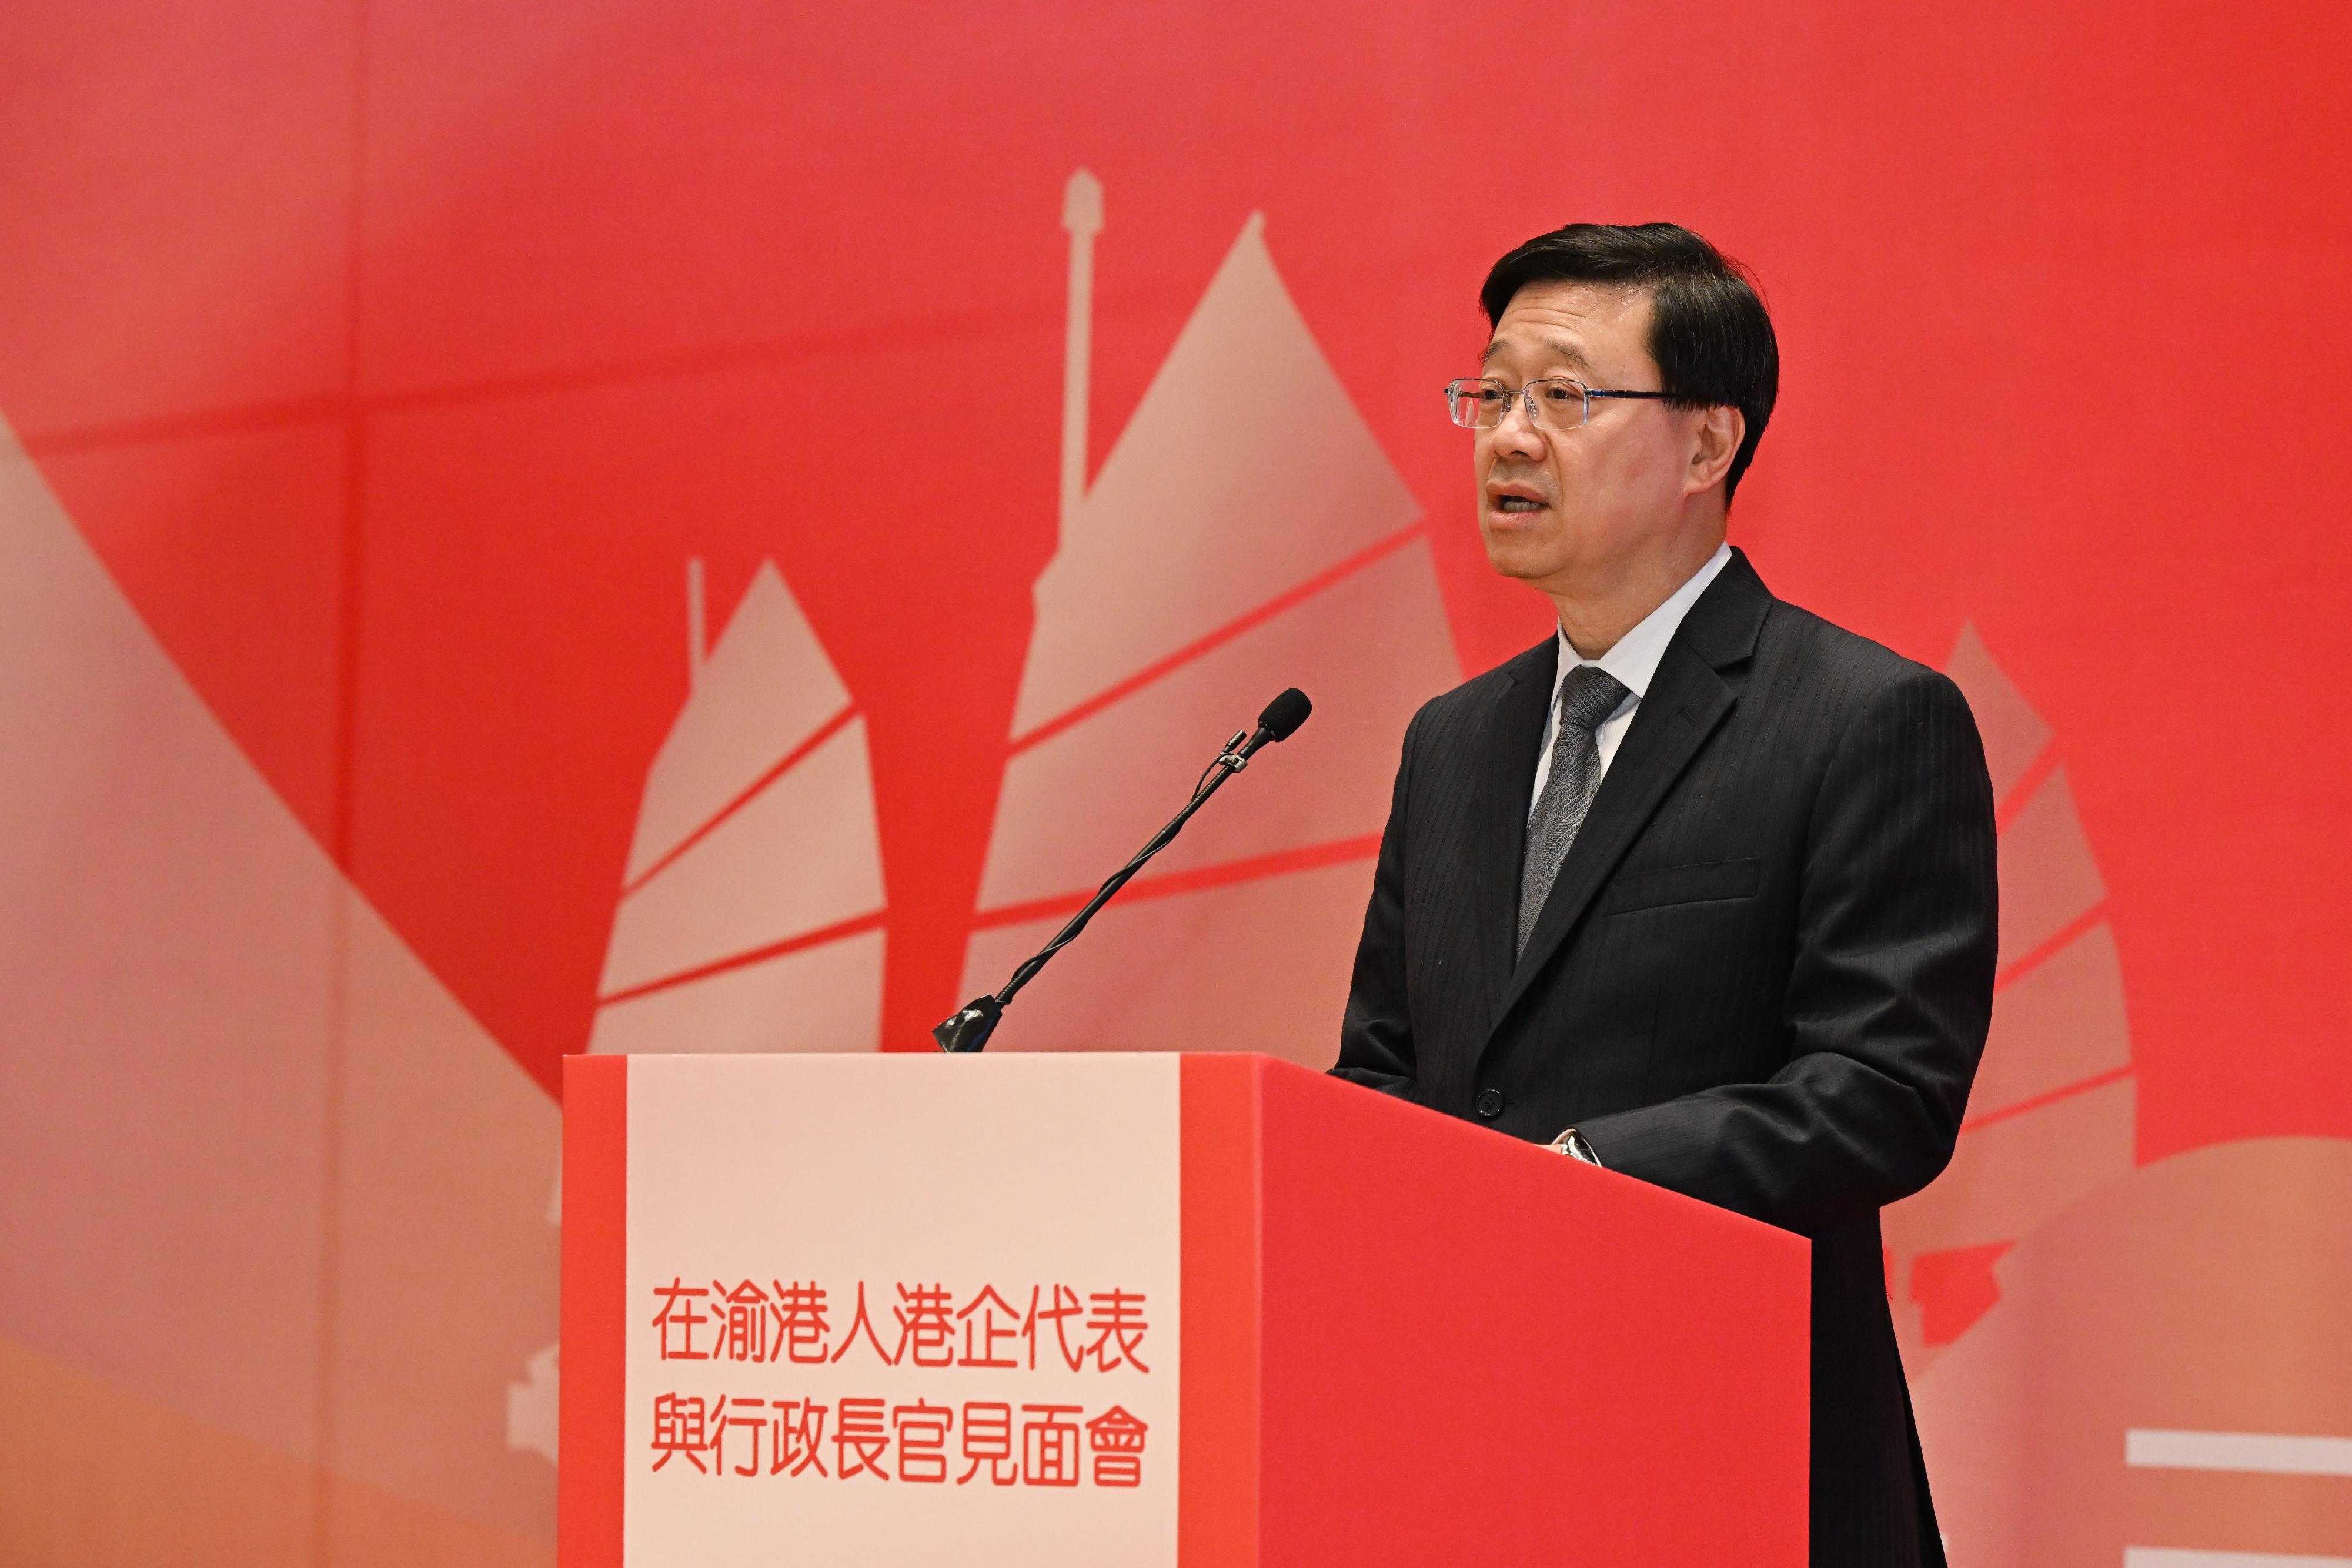 The Chief Executive, Mr John Lee, met and exchanged views with Hong Kong people and representatives of Hong Kong enterprises in Chongqing today (May 10). Photo shows Mr Lee delivering a speech during the dinner.